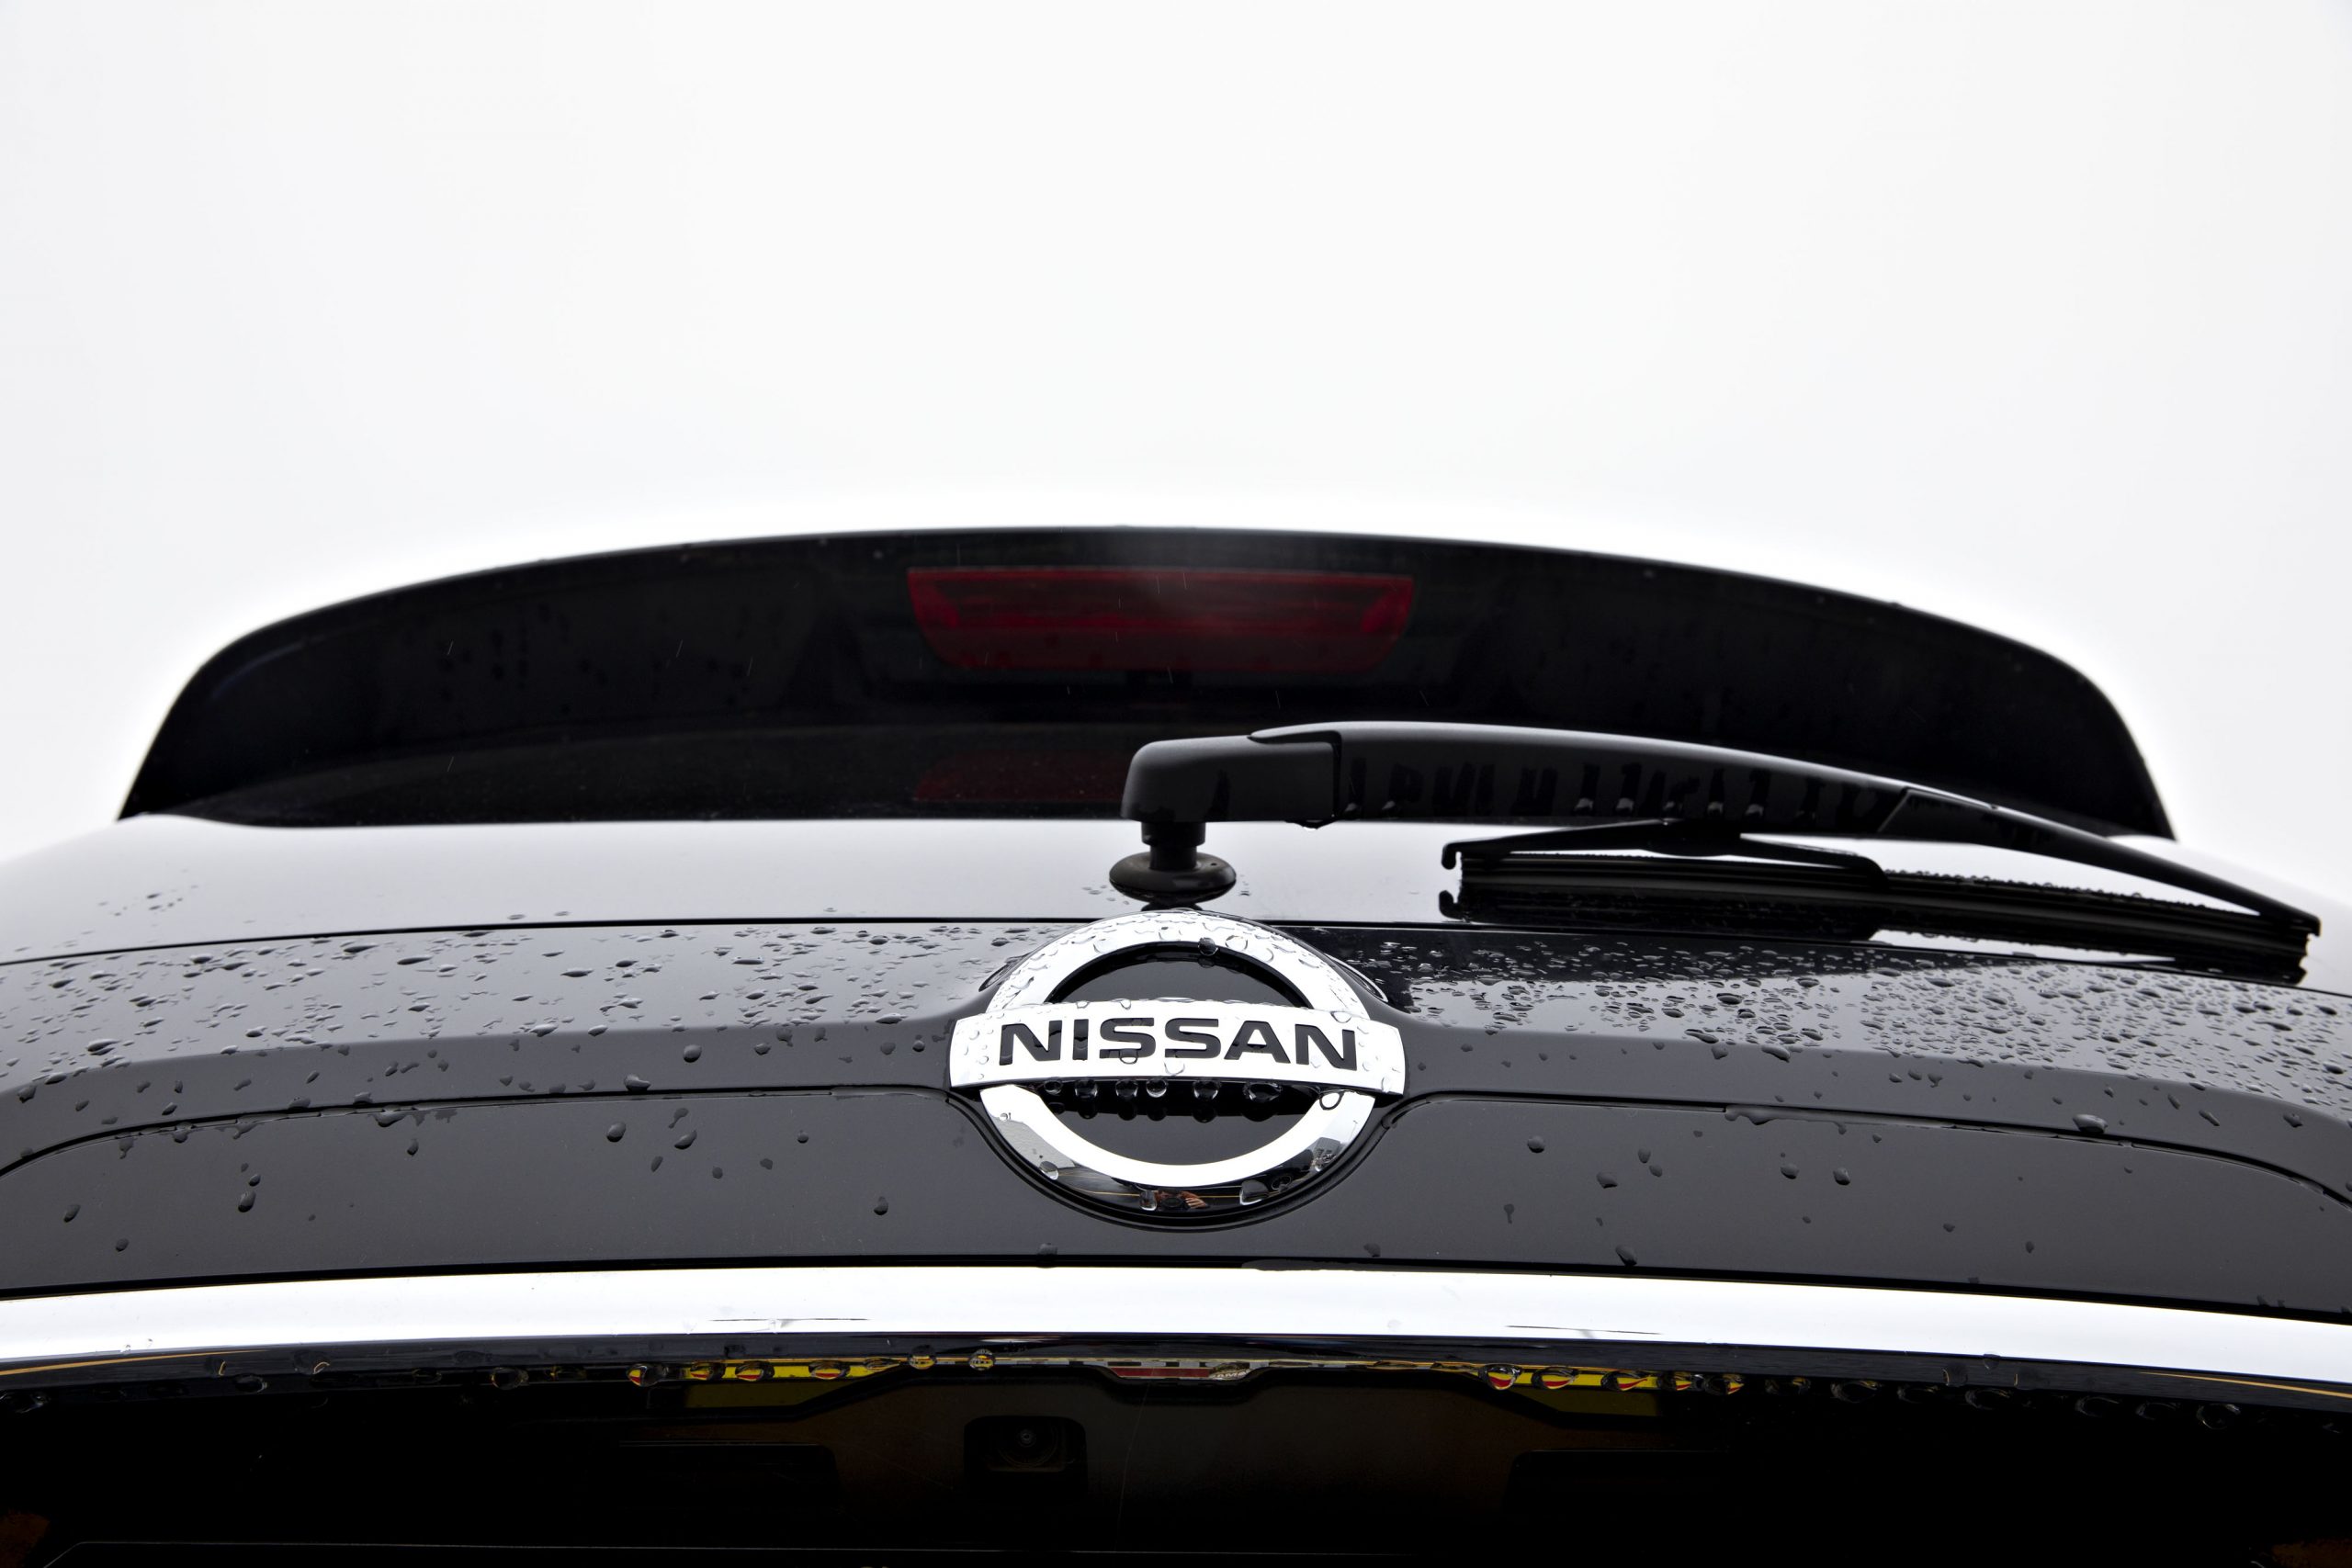 A Nissan logo seen on the back of a Rogue SUV